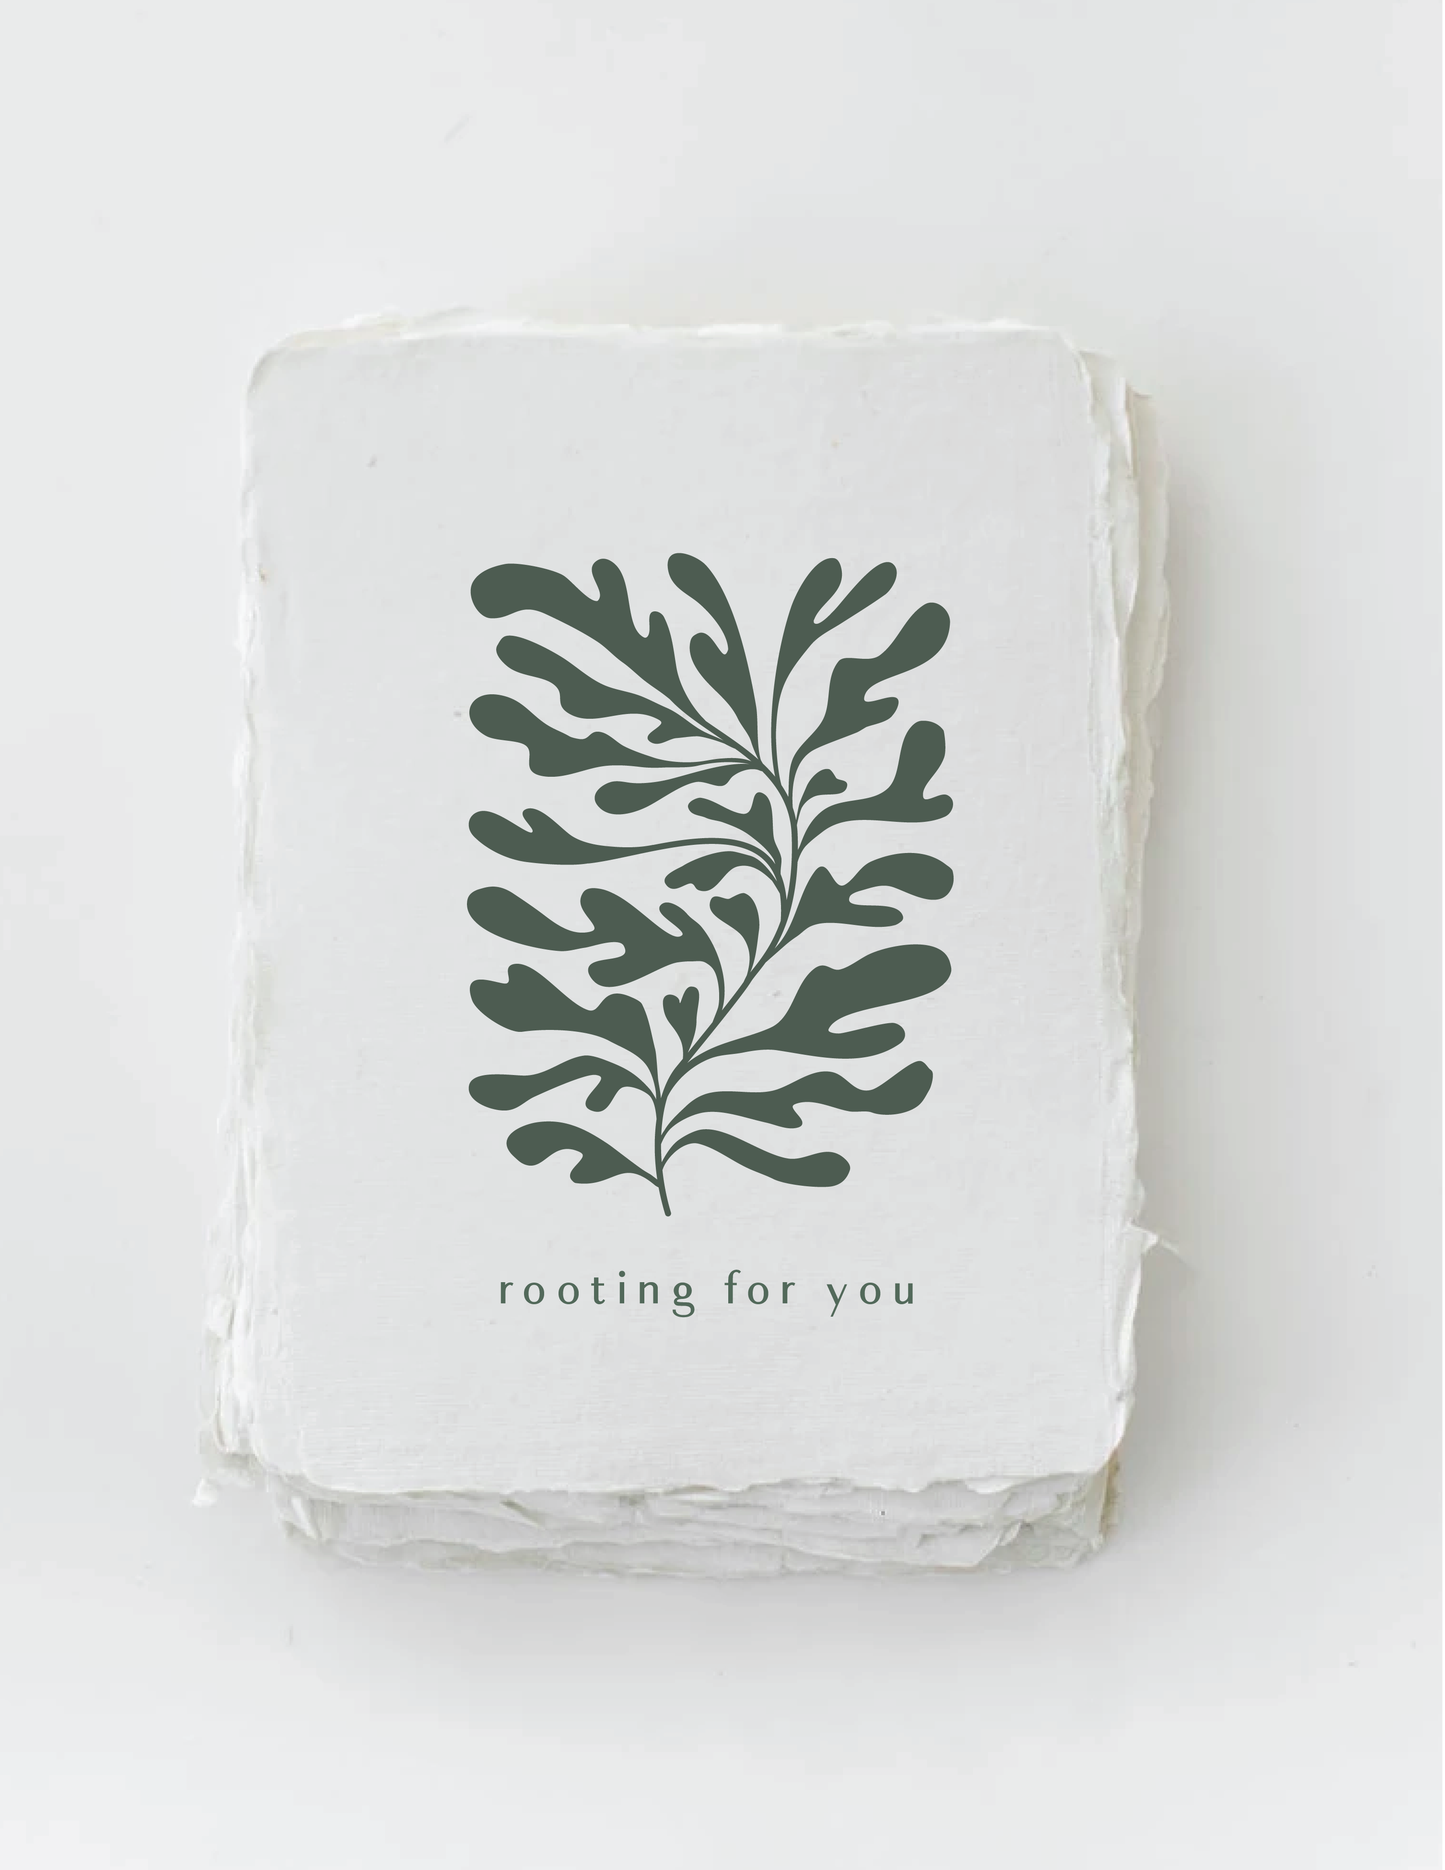 "Rooting for You" Plant Encouragement Greeting Card